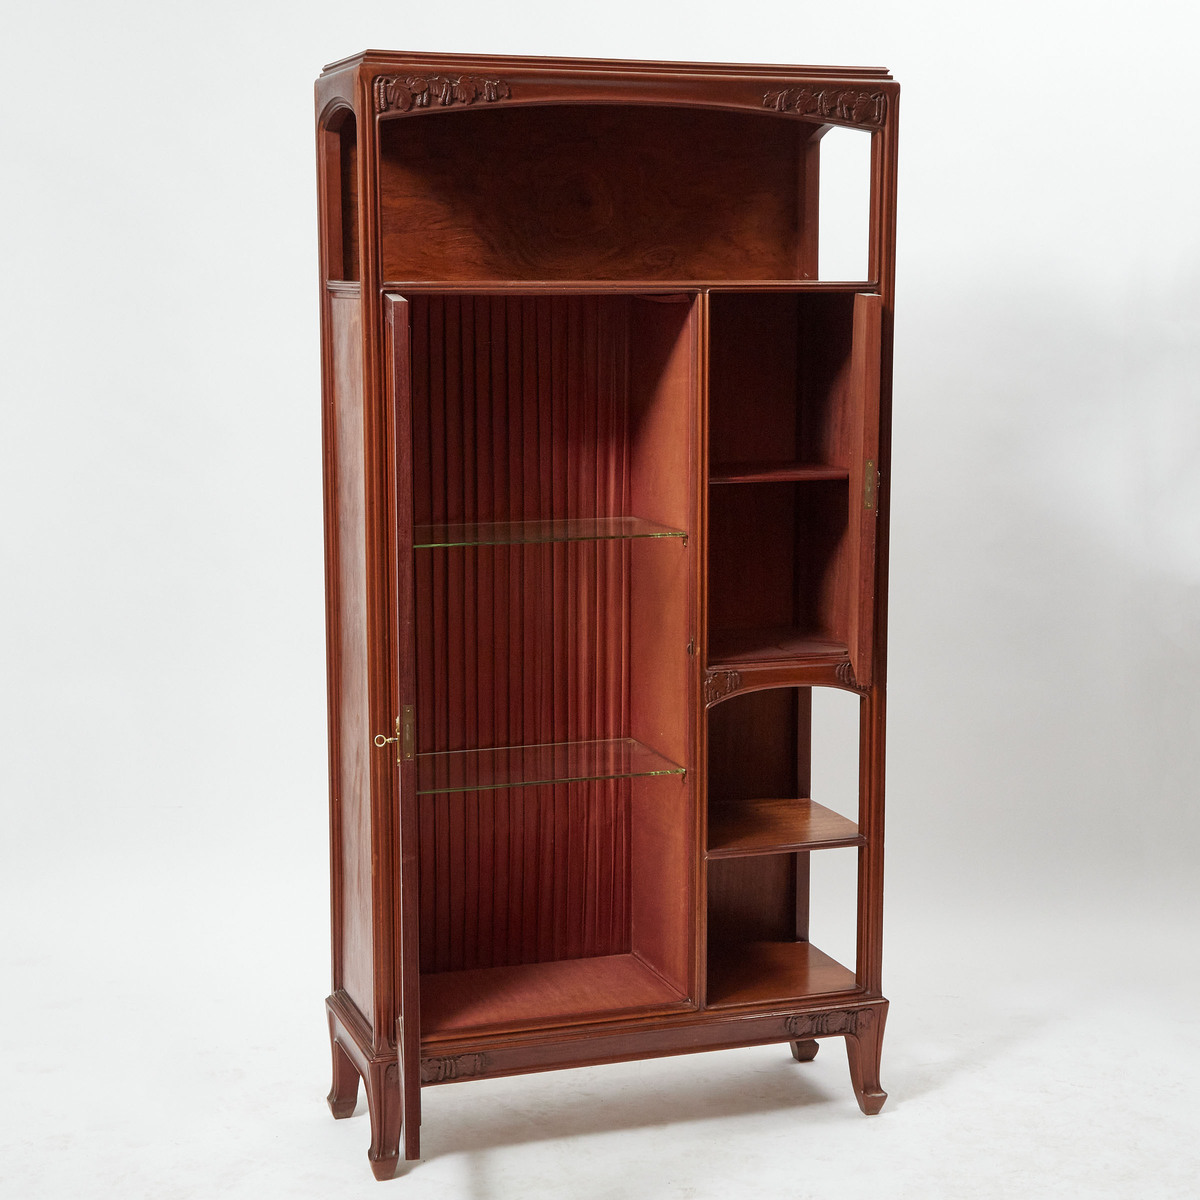 Louis Majorelle Carved and Fruitwood and Rosewood Inlaid Mahogany Tall Vitrine Cabinet, c.1900, 77.2 - Image 3 of 3